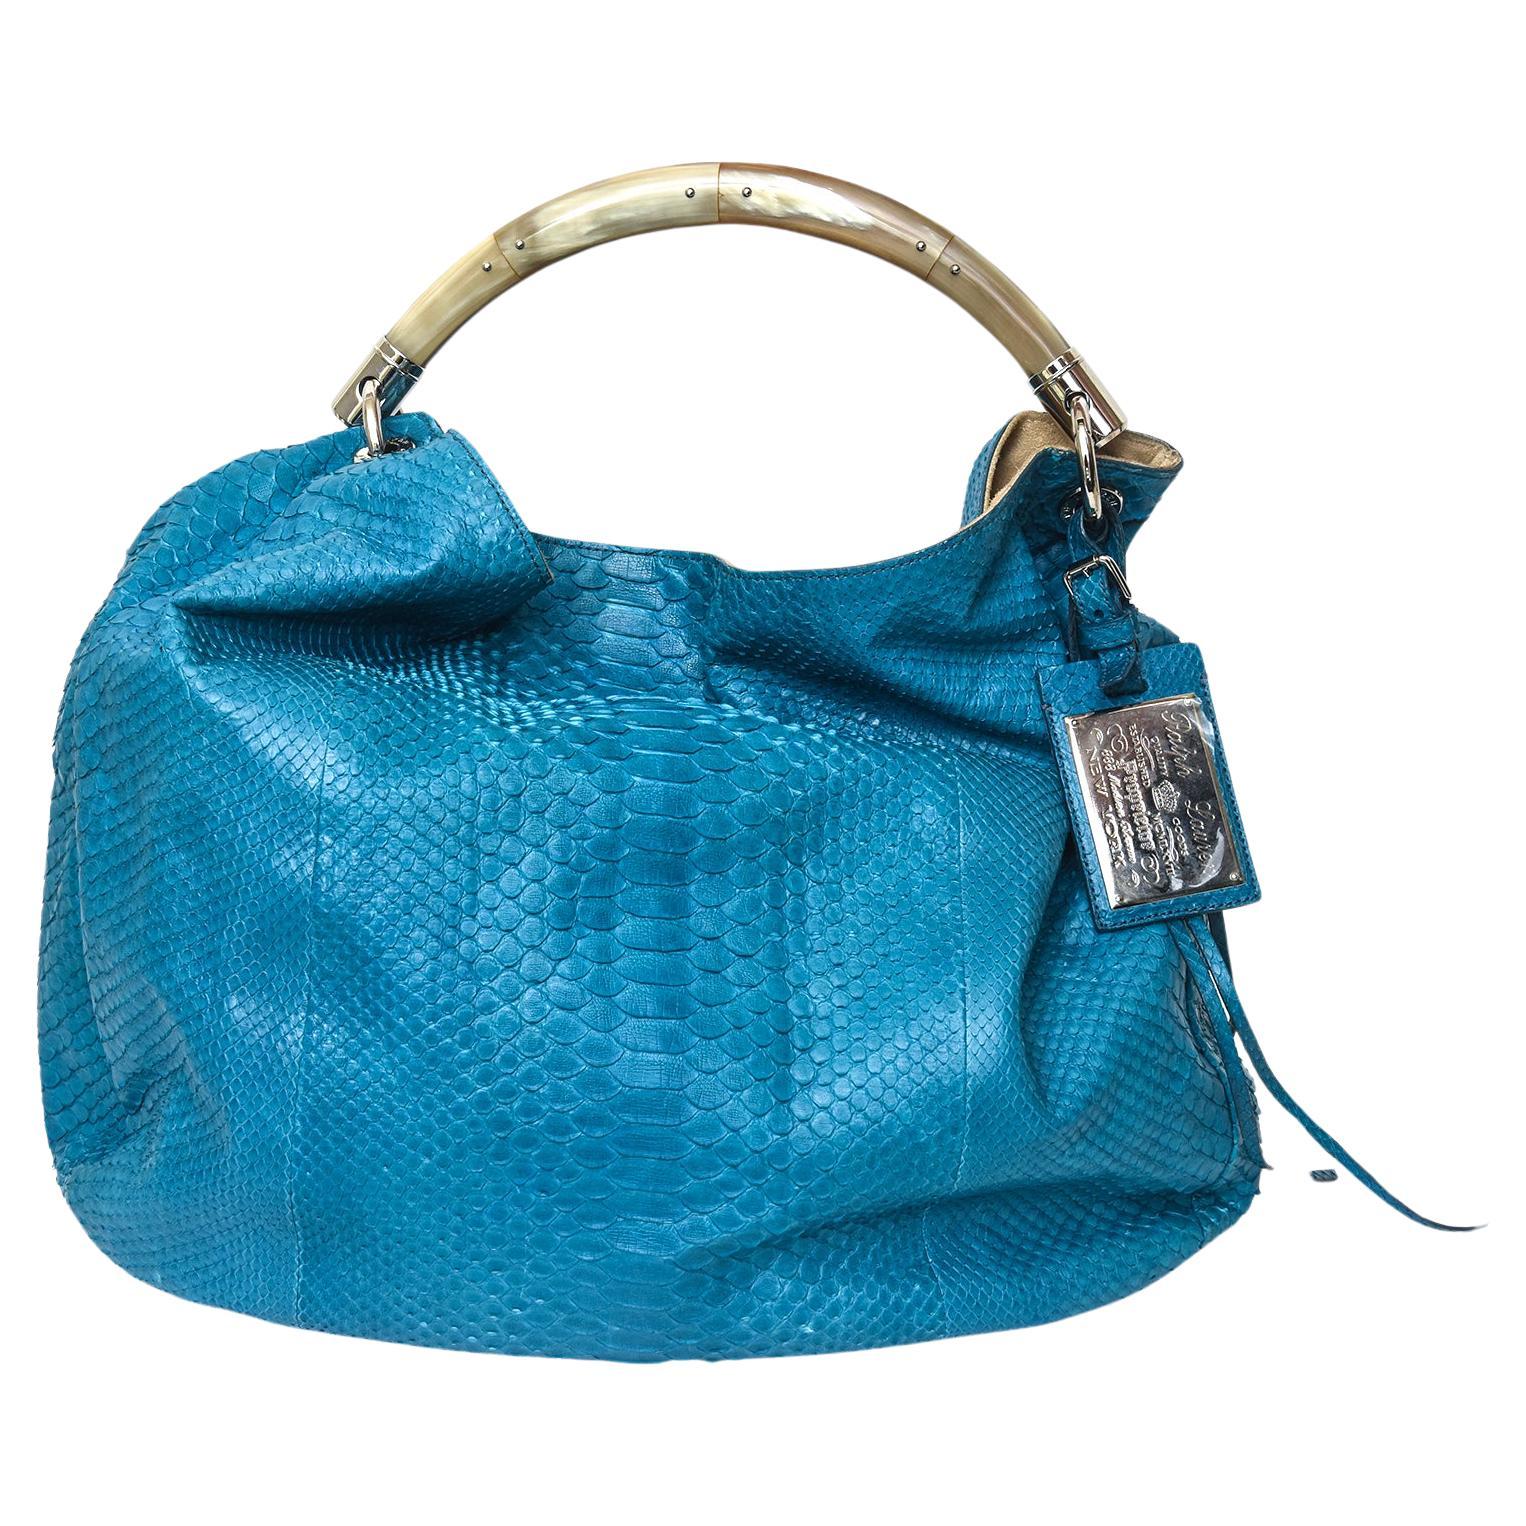 Ralph Lauren Turquoise Python Arm and Shoulder Bag With Bone LIke Top Handle For Sale